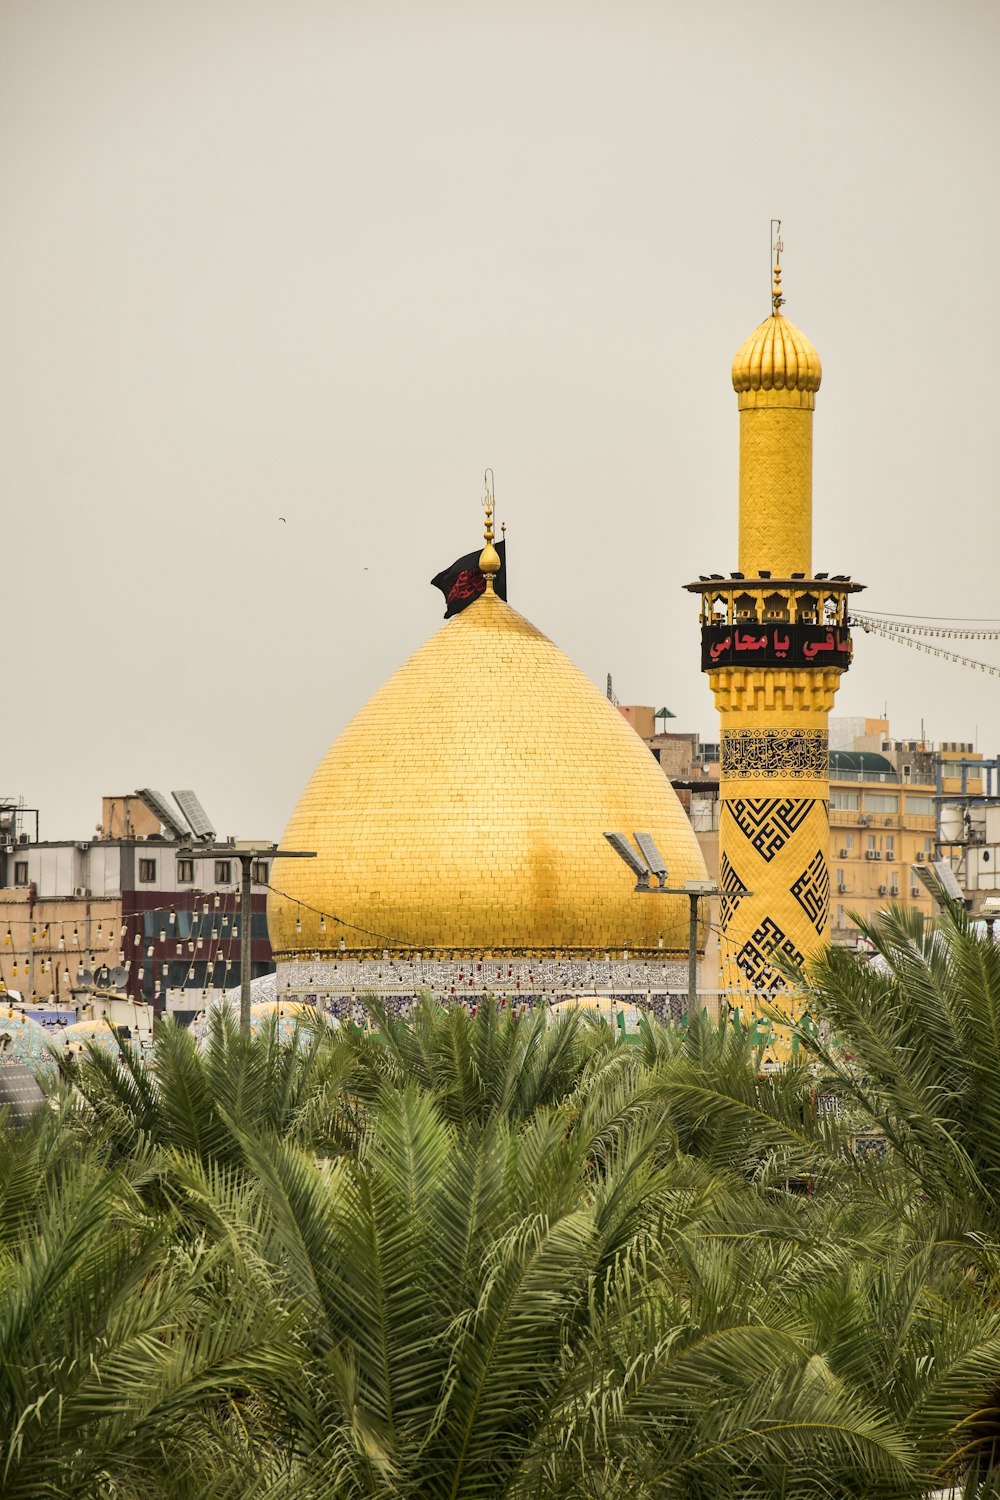 1000+ Imam Hussain Pictures | Download Free Images on Unsplash